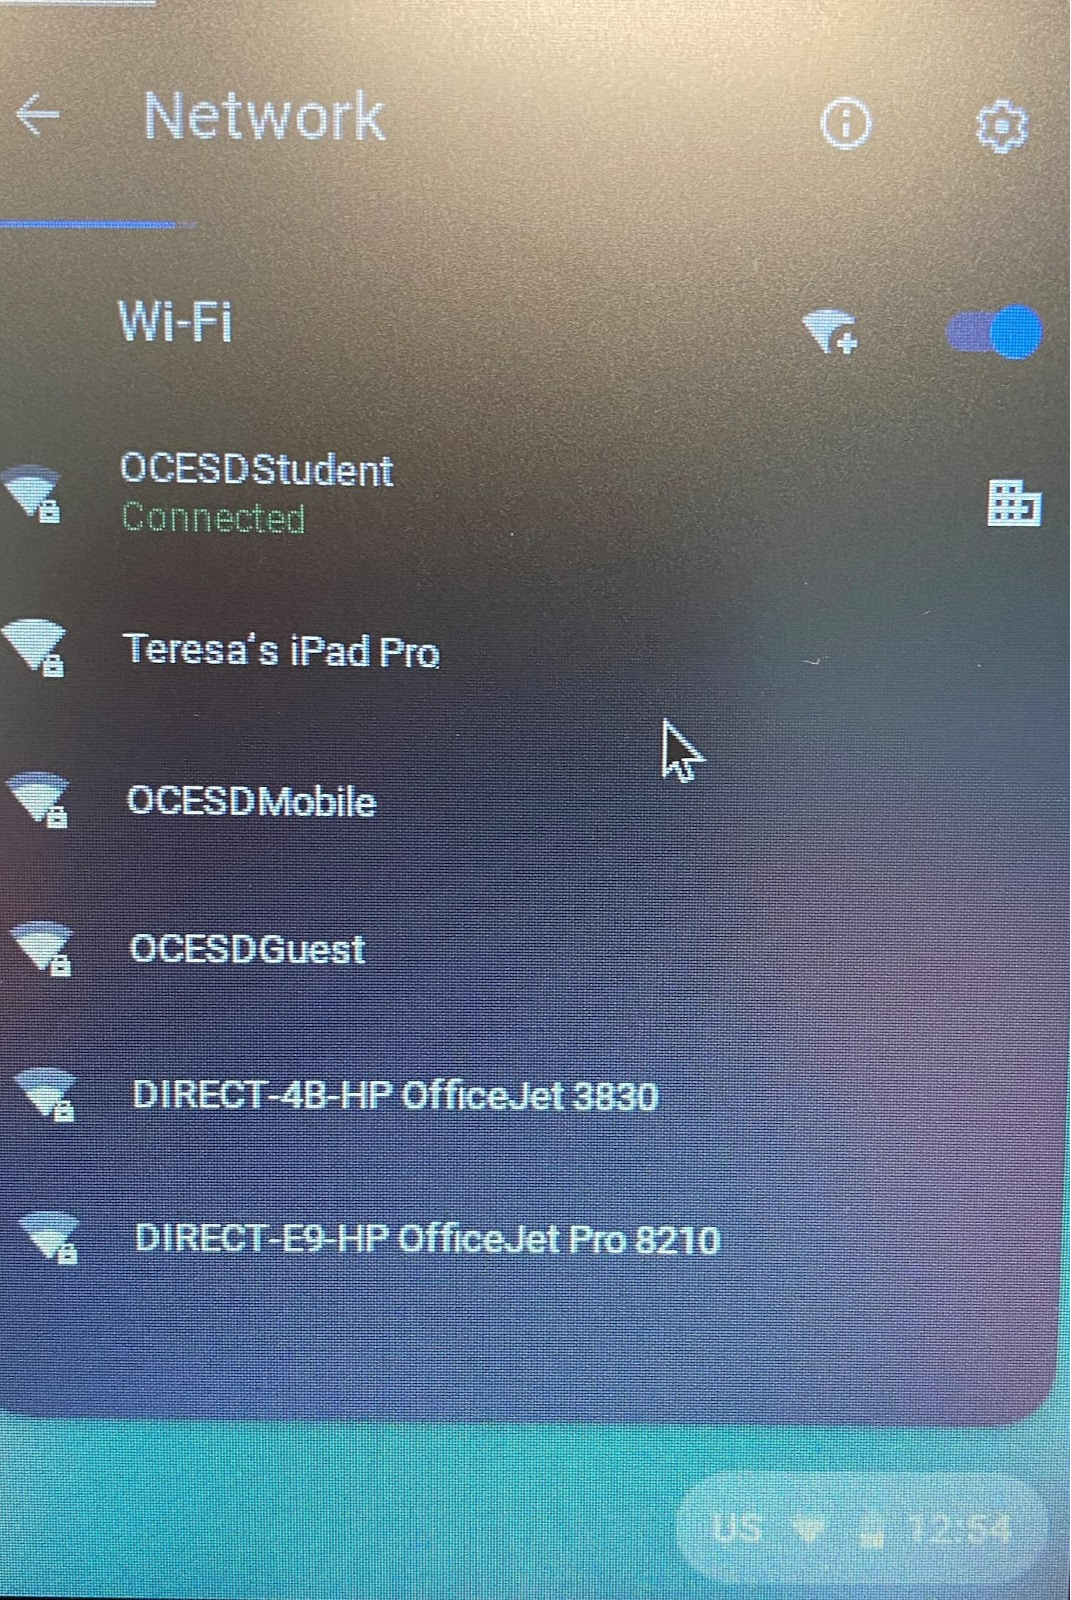 dropdown menu for Network showing Wifi choices